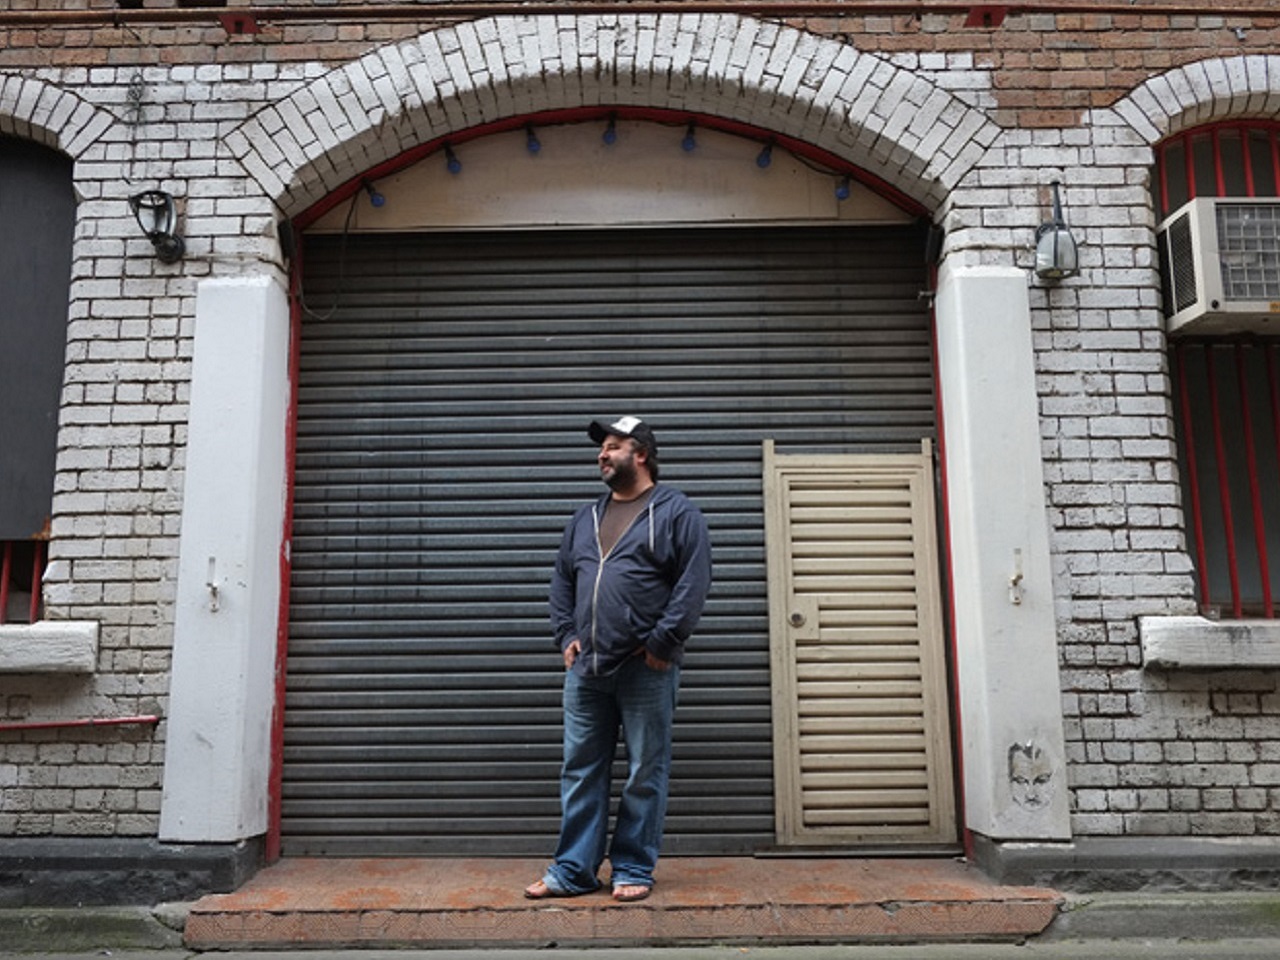 A LANEWAY TOUR WITH ST JEROME